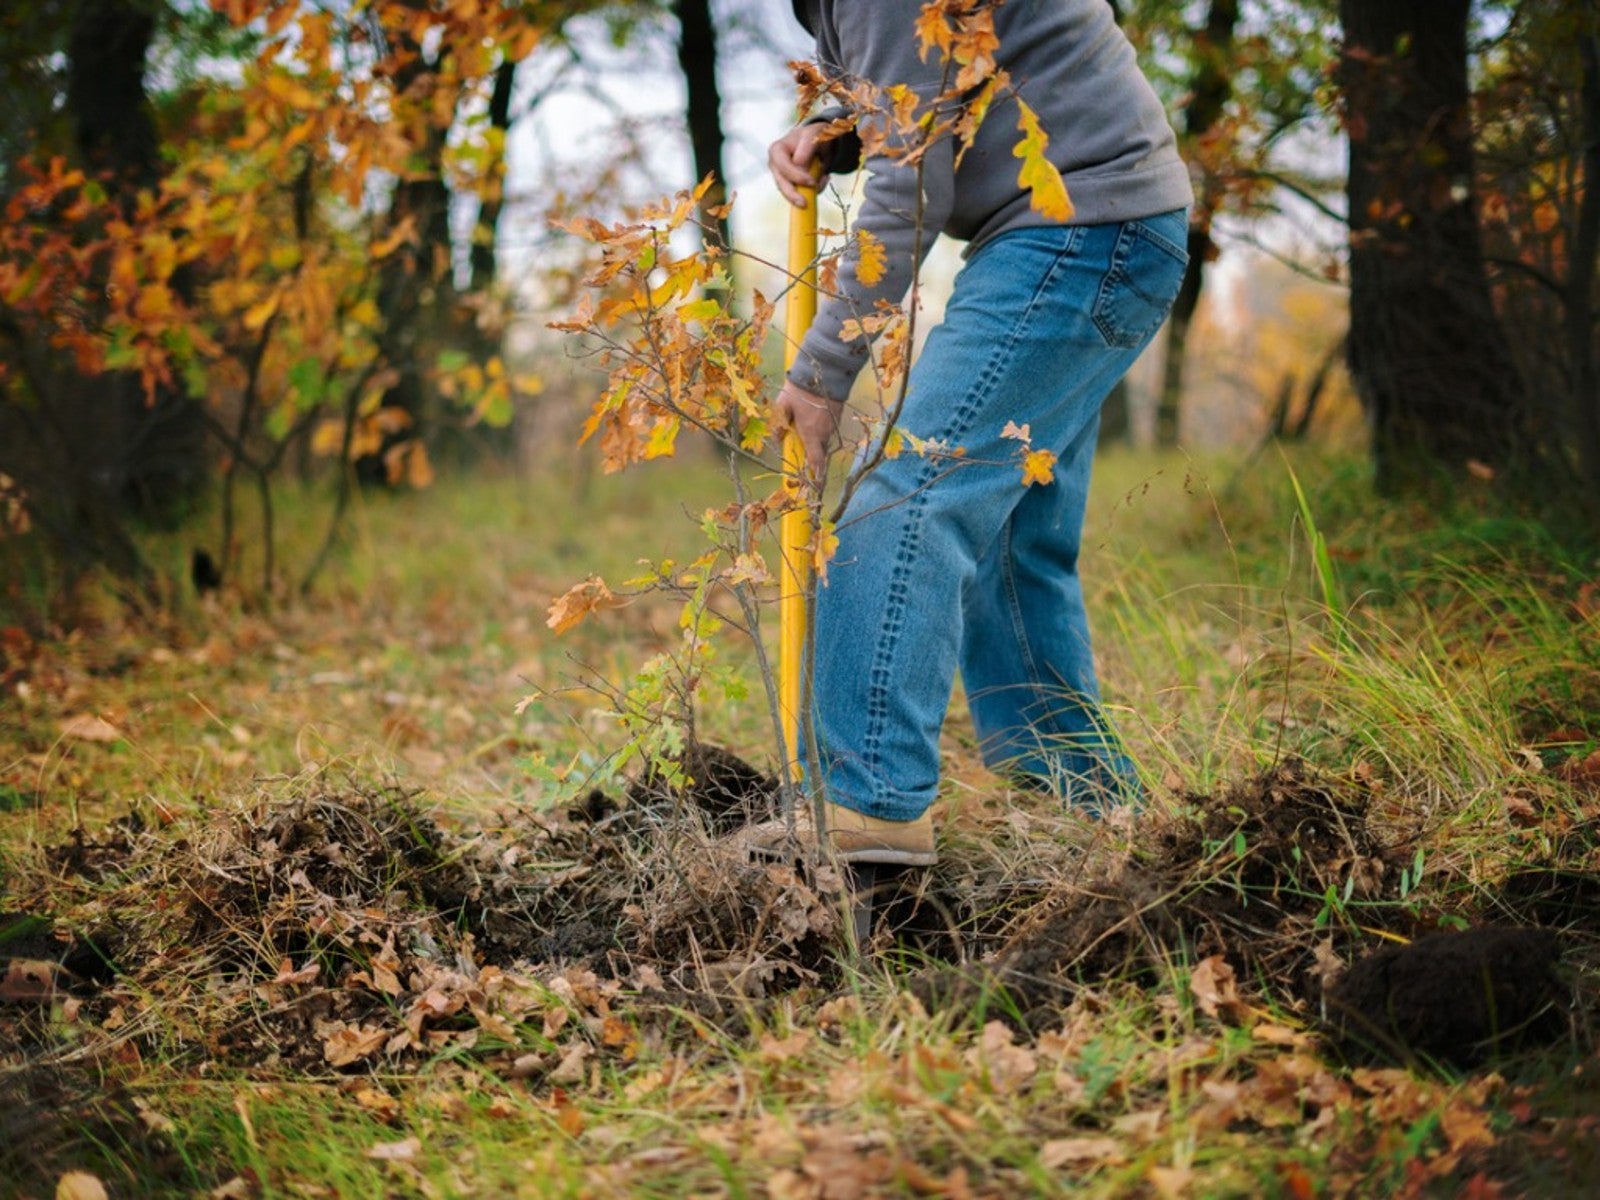 A man with a shovel digs around an oak sapling with orange leaves